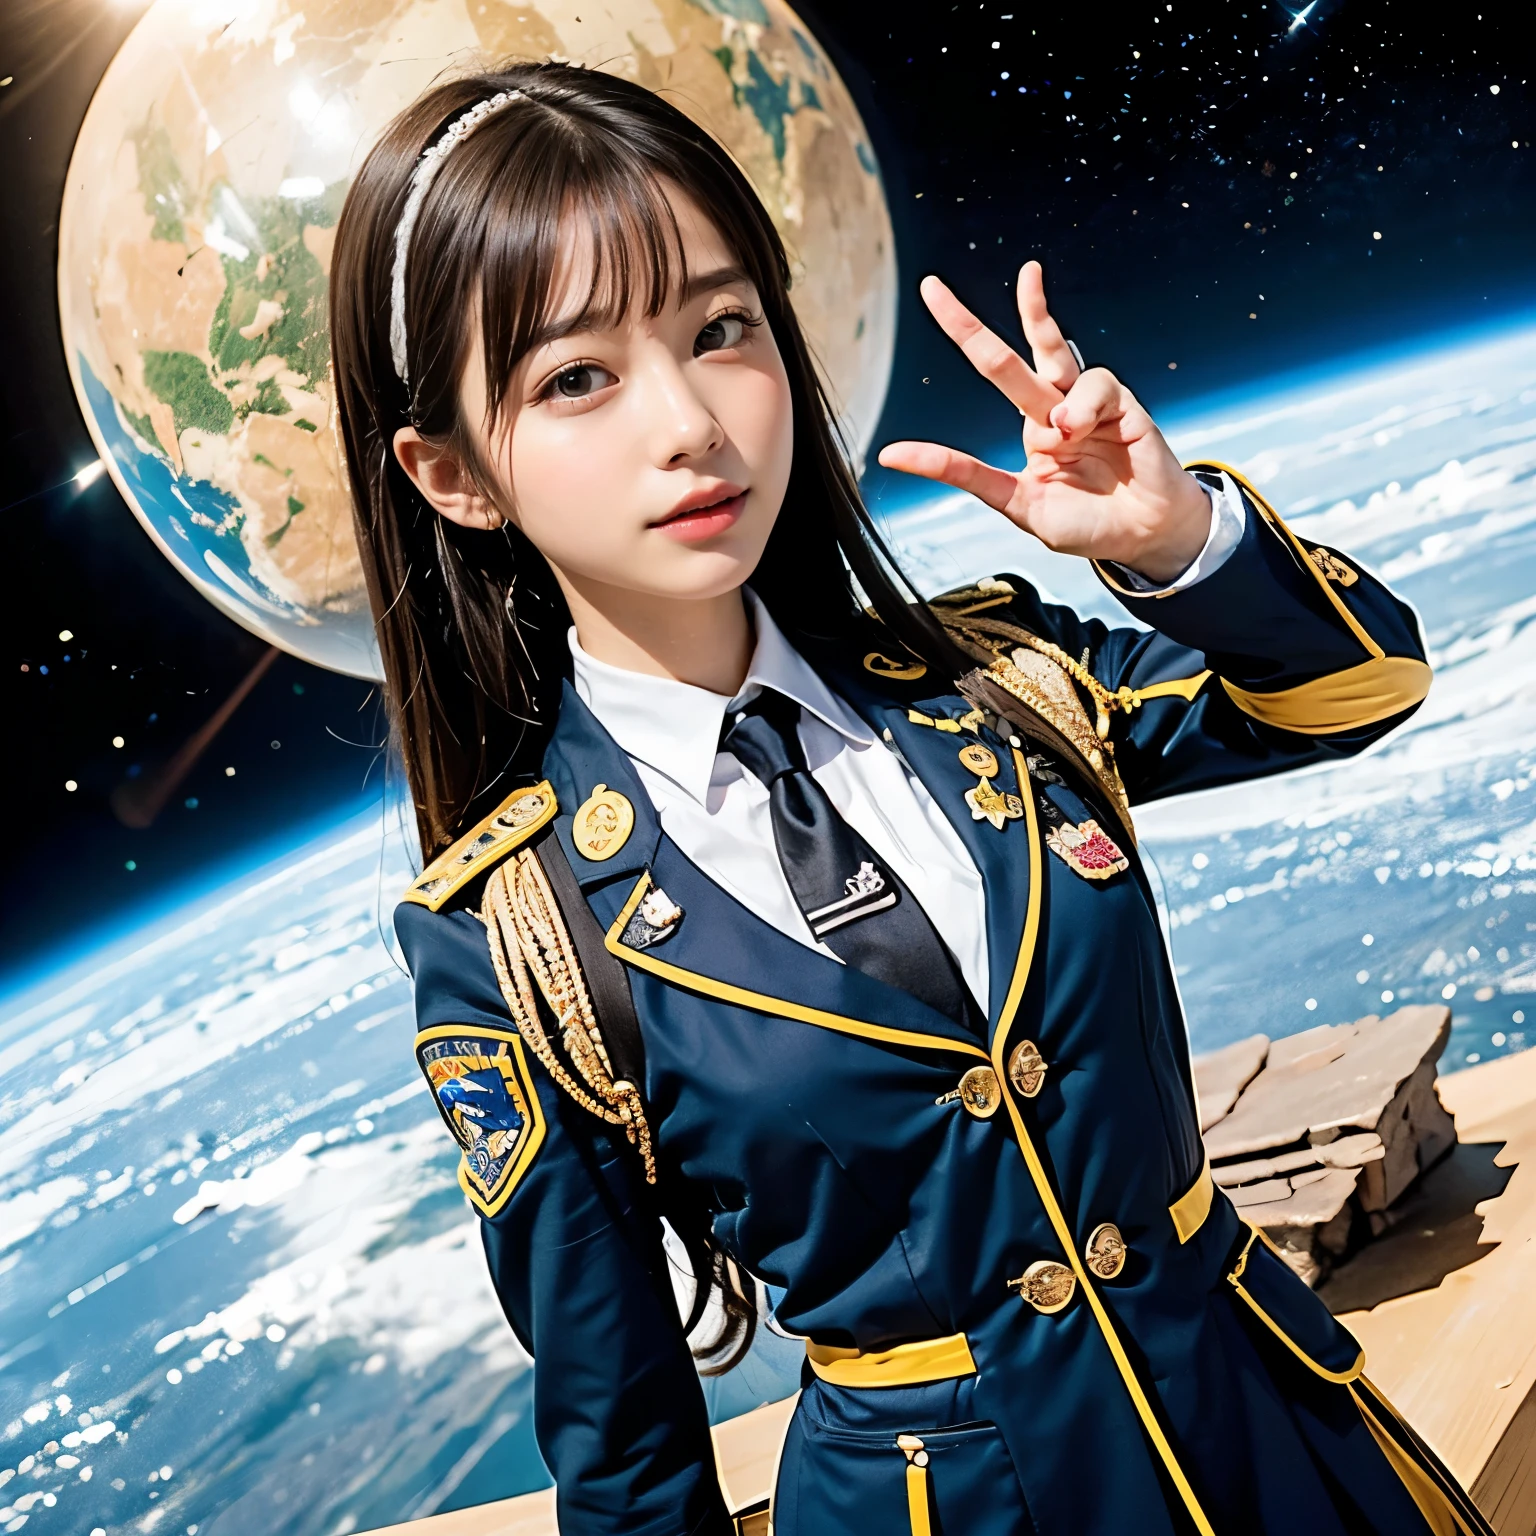 (Pieces fly, highest quality:1.2), 8k, Official Art, Surprised expression、chest、cute、Put your hand over your mouth、Wearing a suitいる、Gesture of removing tie、I can see the chest、A rough image of a girl in a uniform holding a globe, Official Artwork, portrait anime space cadet girl, with the earth, girl in space, Space High School, Space Girl, planet, Trending on cgstation, extrasolar planet, Official Art, Mars planet, Beautiful anime school girl, Sakimi-chan, Floating next to the planet, galaxy japan、Five Fingers Photos&#39;Body of, Esbian all over、Suit Beauty、Big Dipper in the background、star explosion、Beautiful barefoot woman with black hair, Hold a flame in your right hand、Tie your tie with your right hand、Look up、Looking down、Cool look、Bright lava lights rise from beneath the asteroid belt over the broken Earth(Jagged rocks and debris flew into the air.:1.3) (Windy dust storm:1.1) Volume fogmist by trace Z、Allows bright light from below to pass through、 (masterpiece) (highest quality) (detailed) (8k) (Cinema Lighting) (Sharp focus) (complicated)Black Hair、14 years old、Small chest、Fun、Laughter、Incredibly stupid, (beautiful girl, Pretty face, lean back, Gold ornament in hair、Wearing a suit、Close up of chest, Wearing a suitいる, Short sleeve, Gardenia, Violacea, space , View Viewer, Film Grain, chromatic aberration, Boobs sharp focus, Face Light, Dynamic Lighting, Cinema Lighting, Detailed eyes and face, (Grey tie、1:1.2)